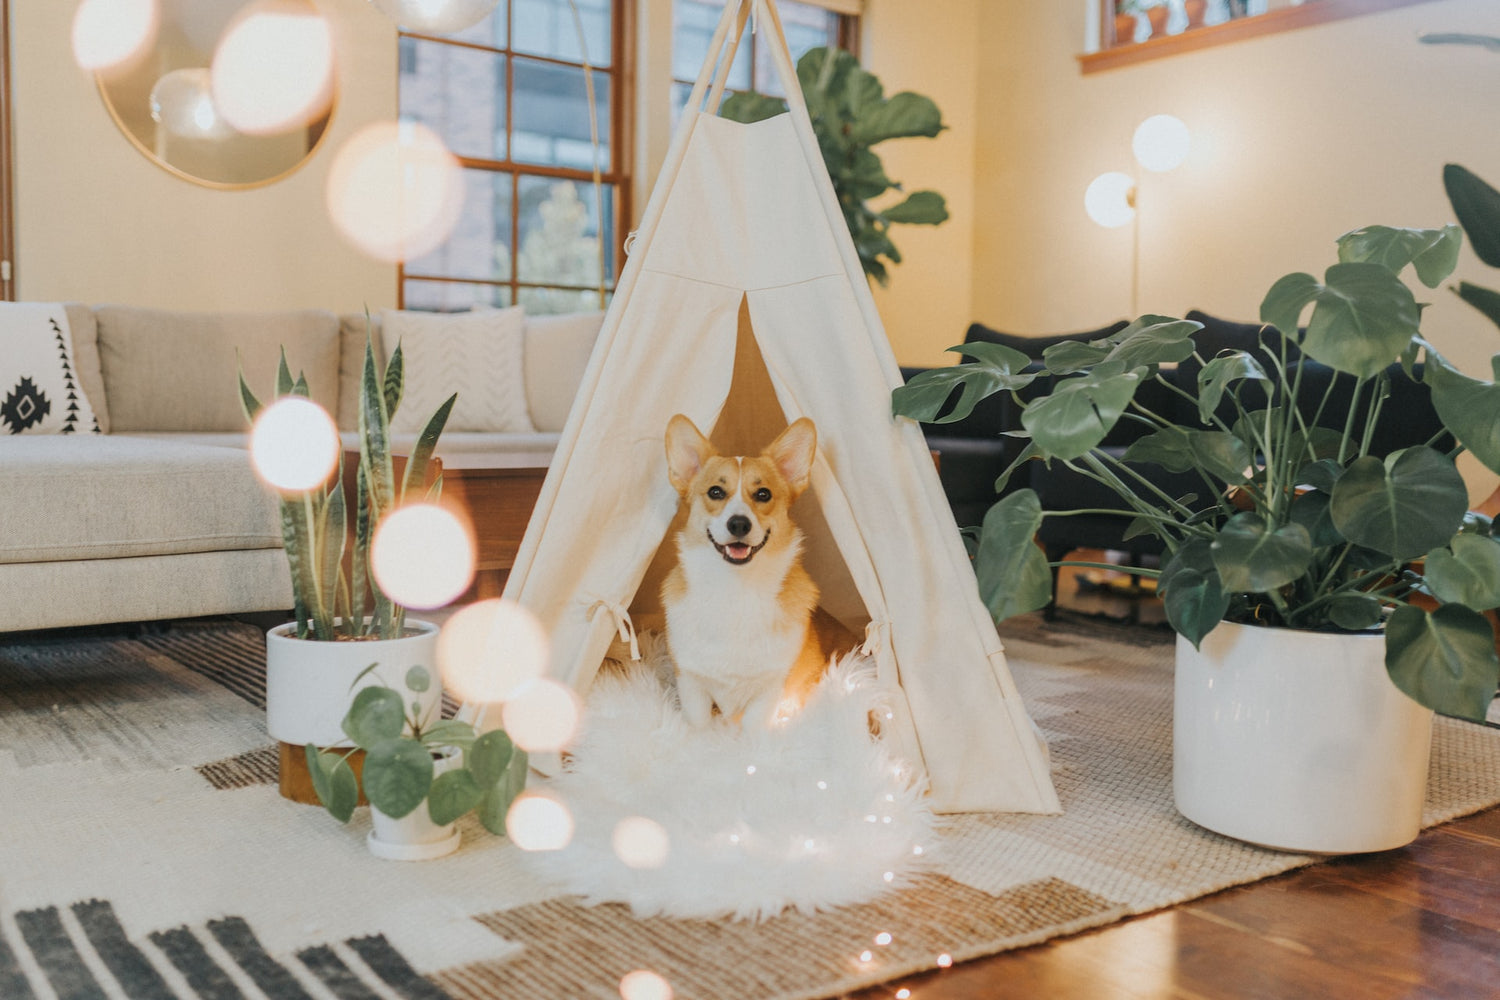 Apartment Living With Corgis: Why They Are The Best Apartment Dogs